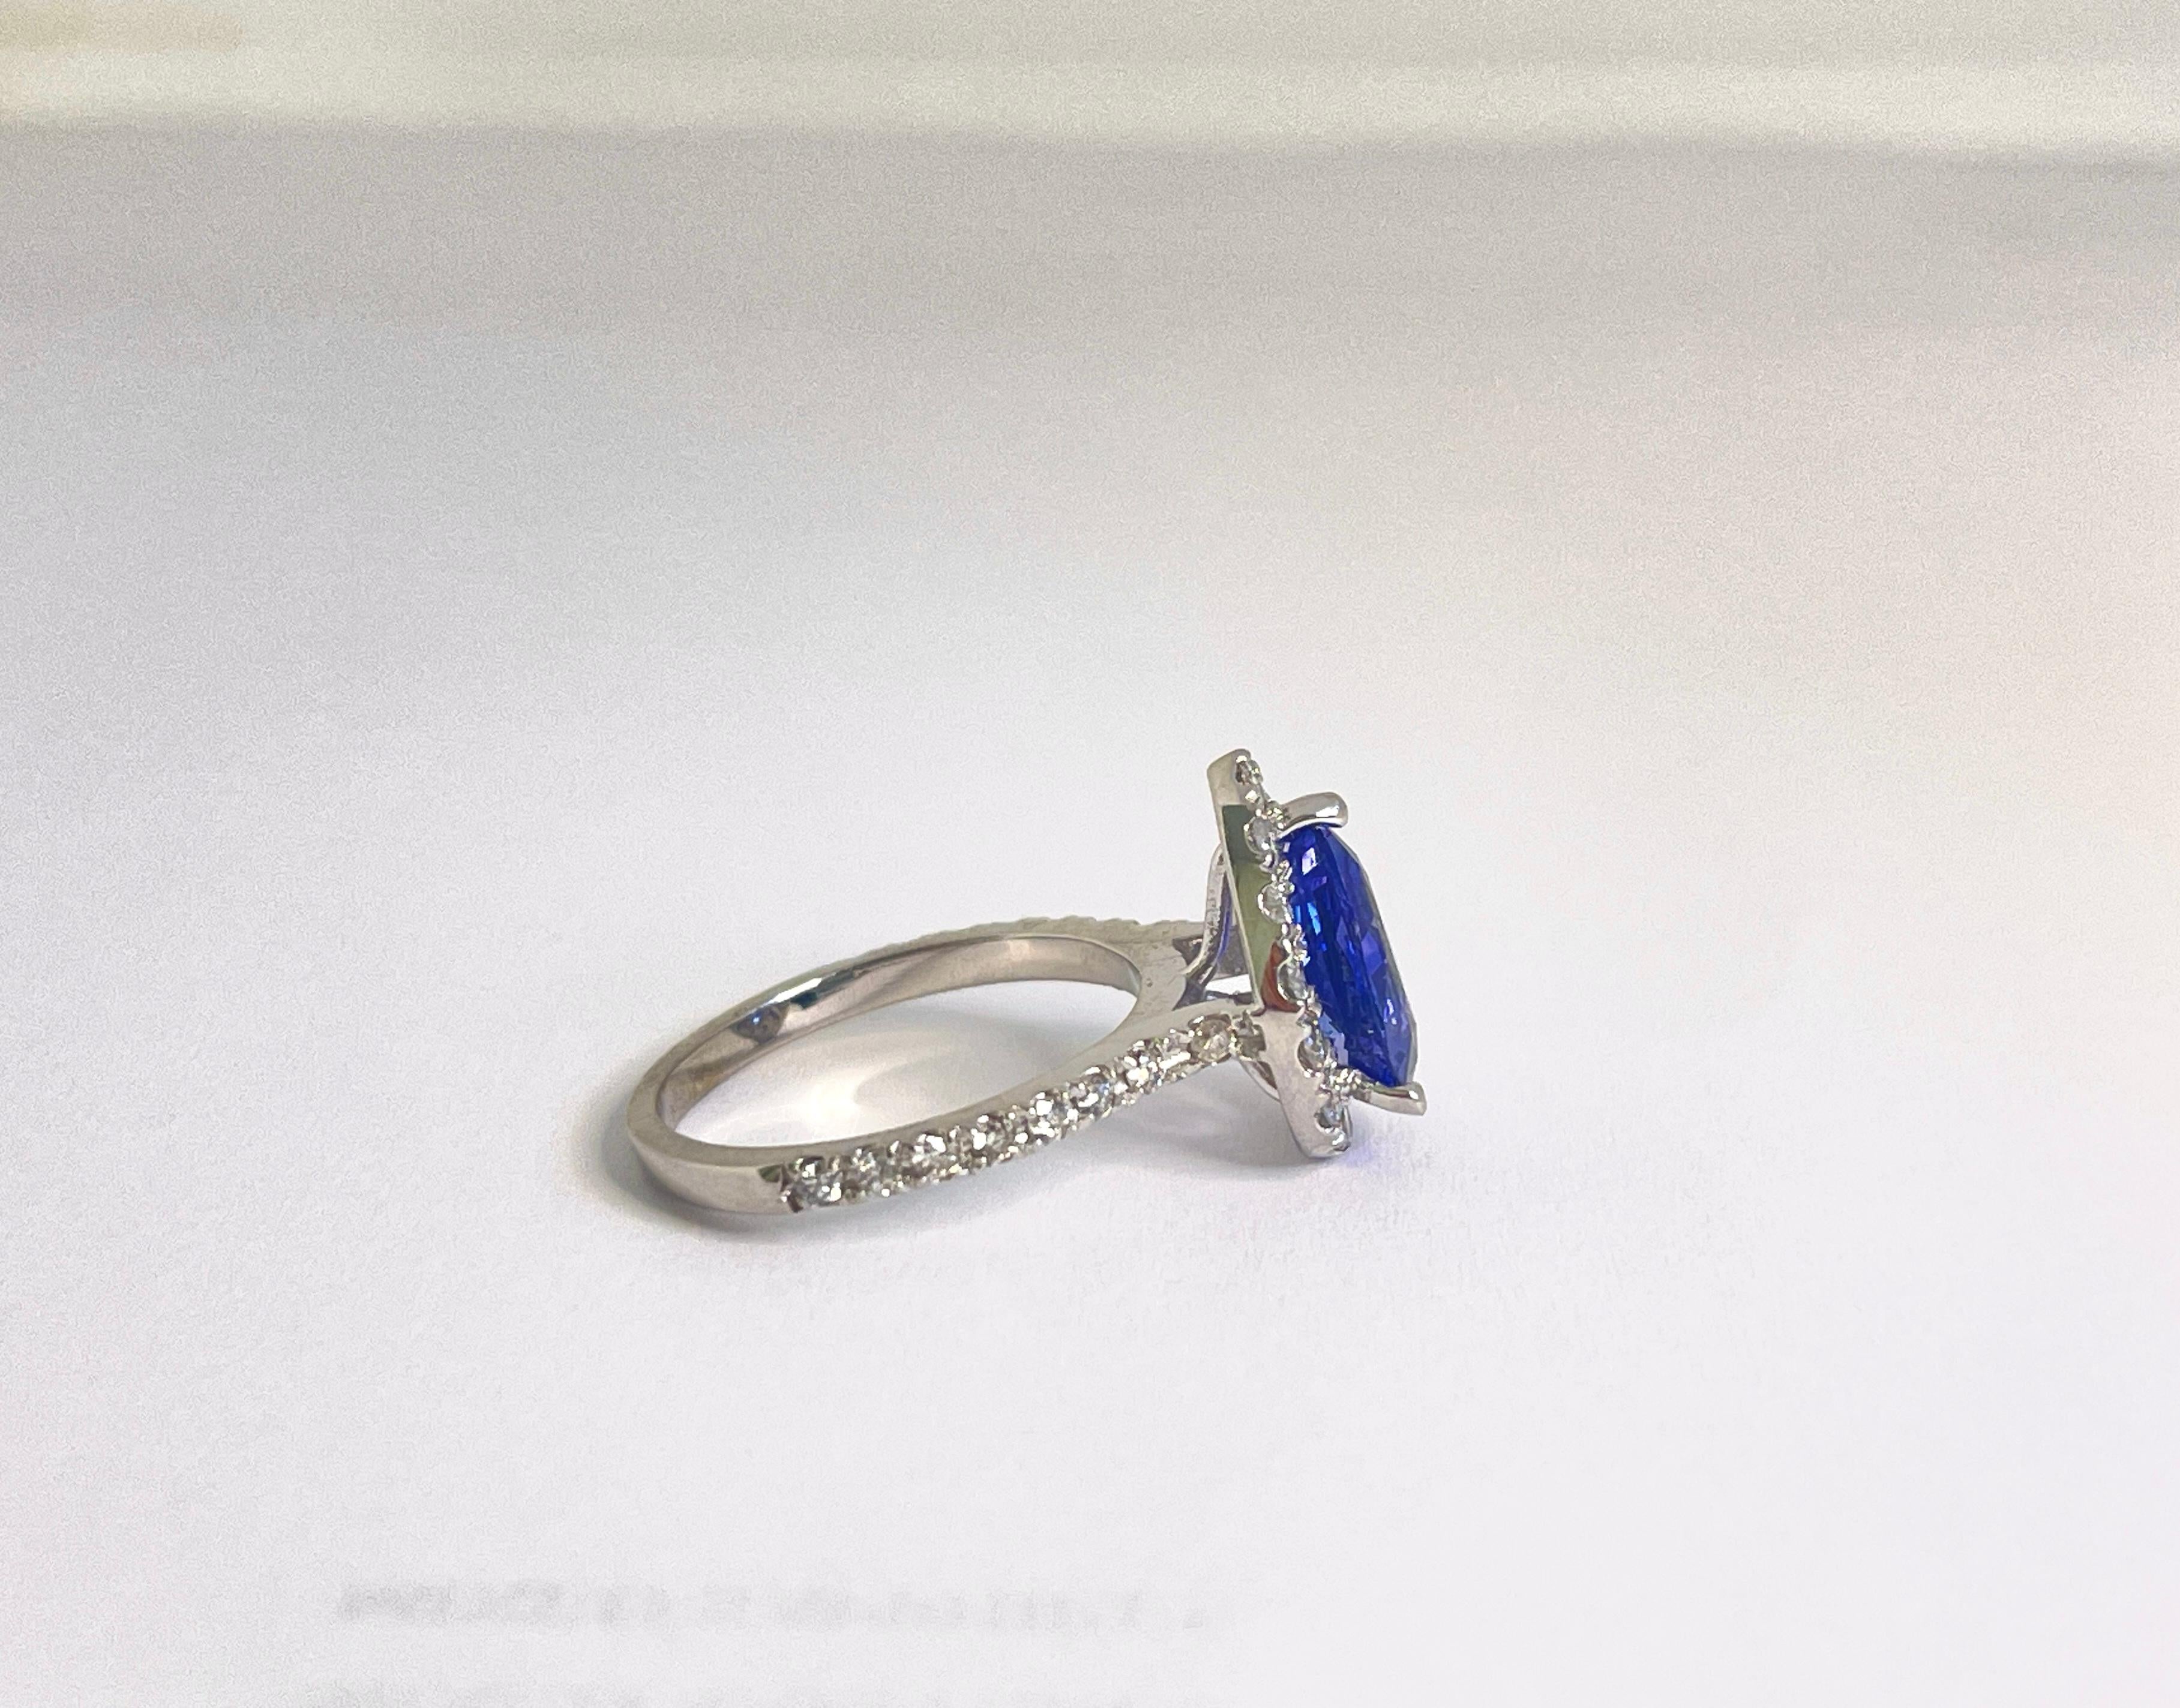 2.16 Carat Pear Shaped Purple-Blue Sapphire Diamond 14K White Gold Ring In New Condition For Sale In Great Neck, NY